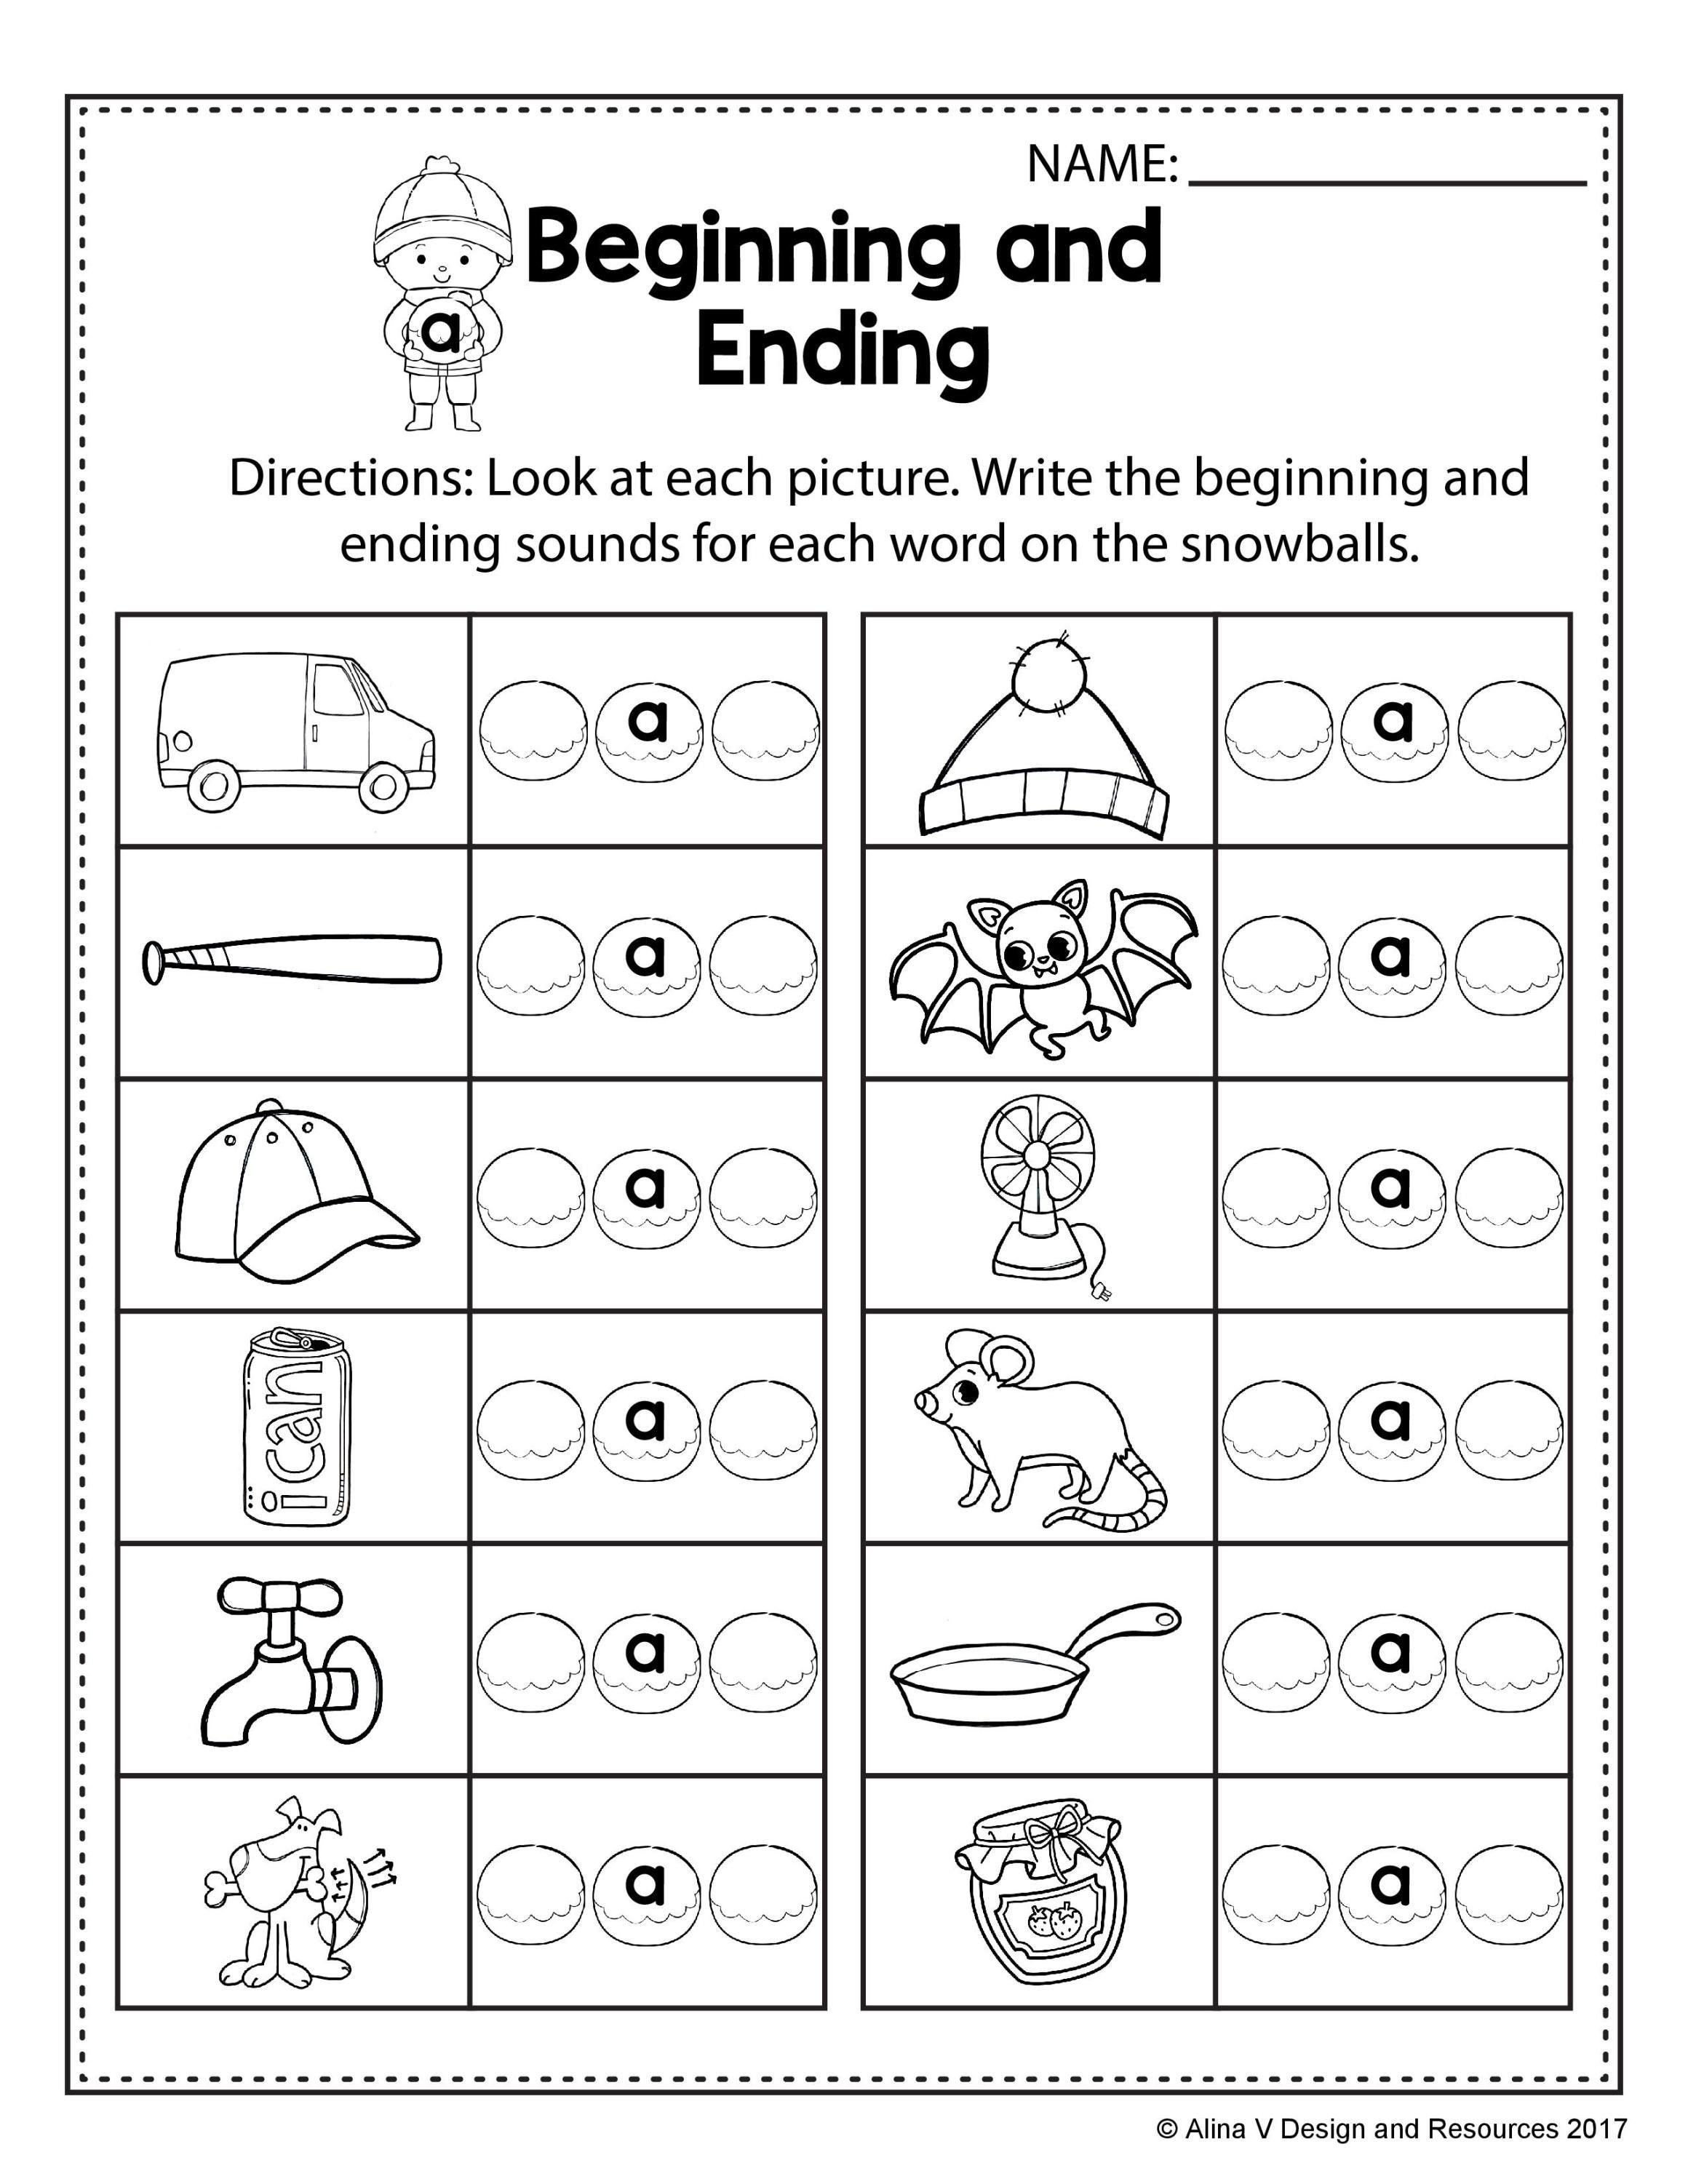 Worksheet Converting Improper Fractions To Mixed Numbers Print Your And Ending Sounds Worksheets Pdf